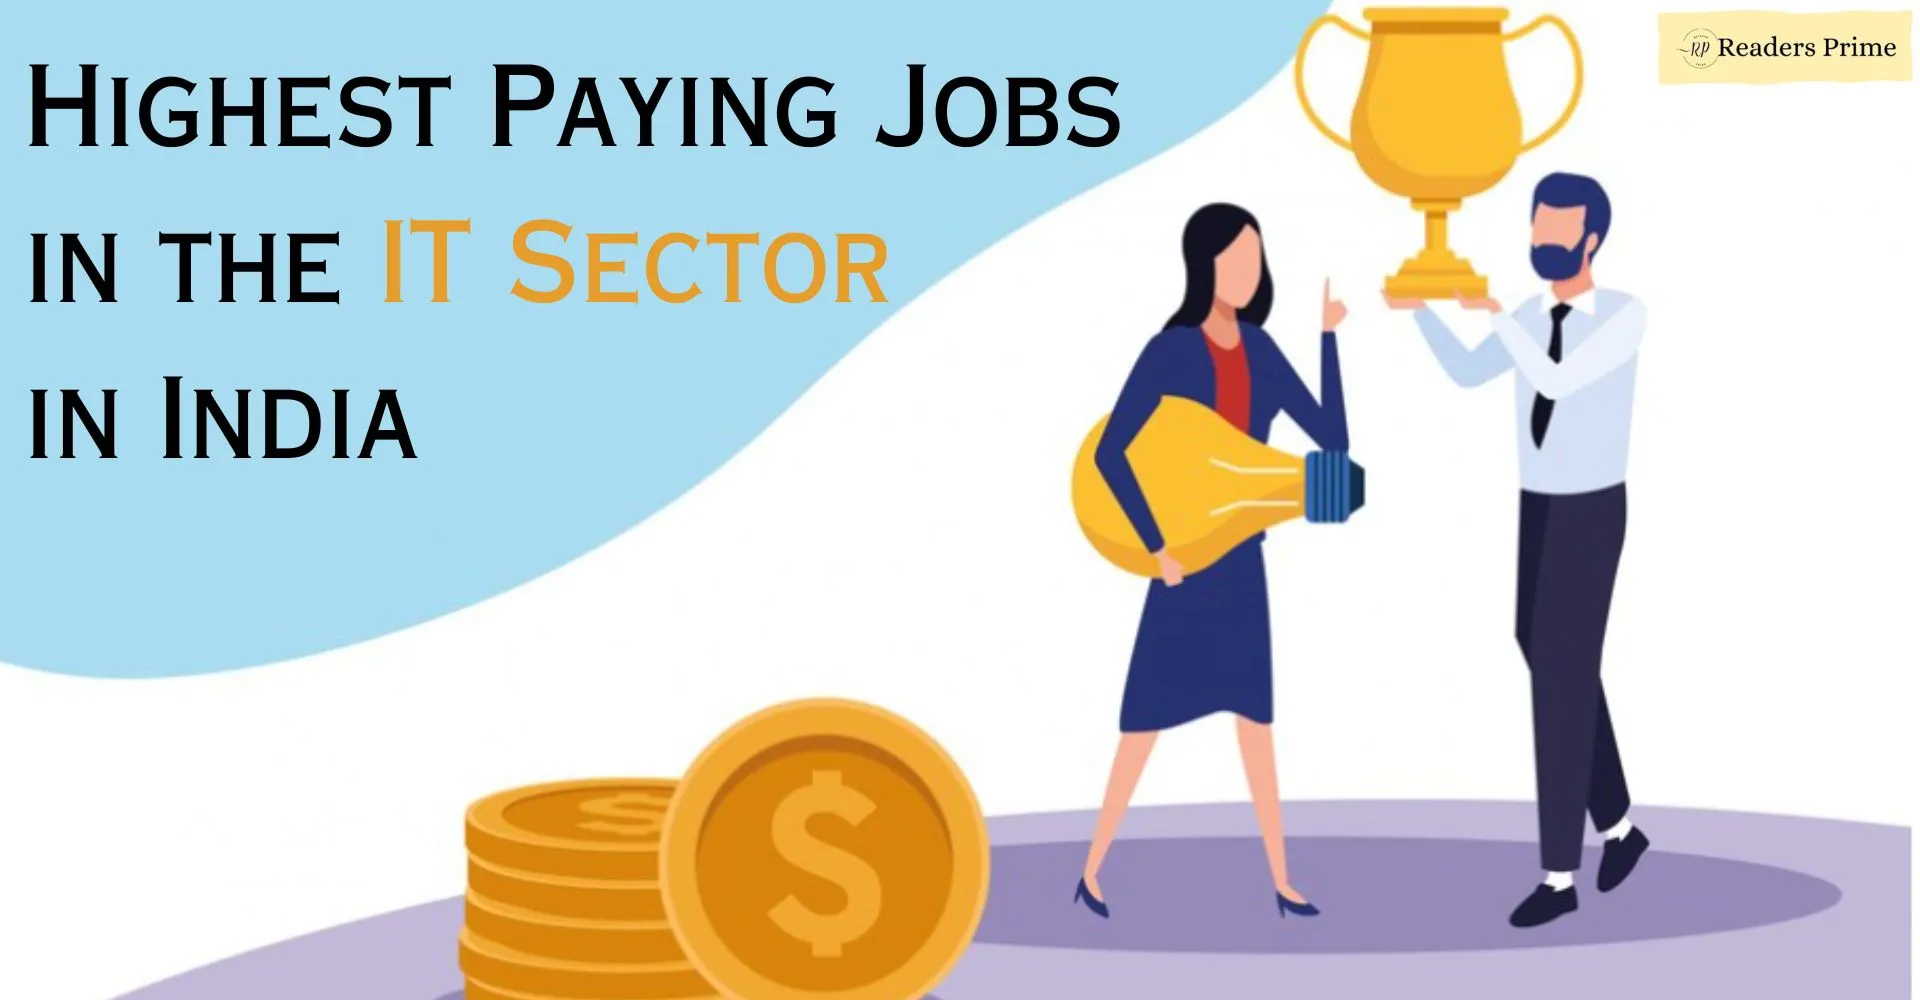 Highest Paying Jobs in the IT Sector in India.